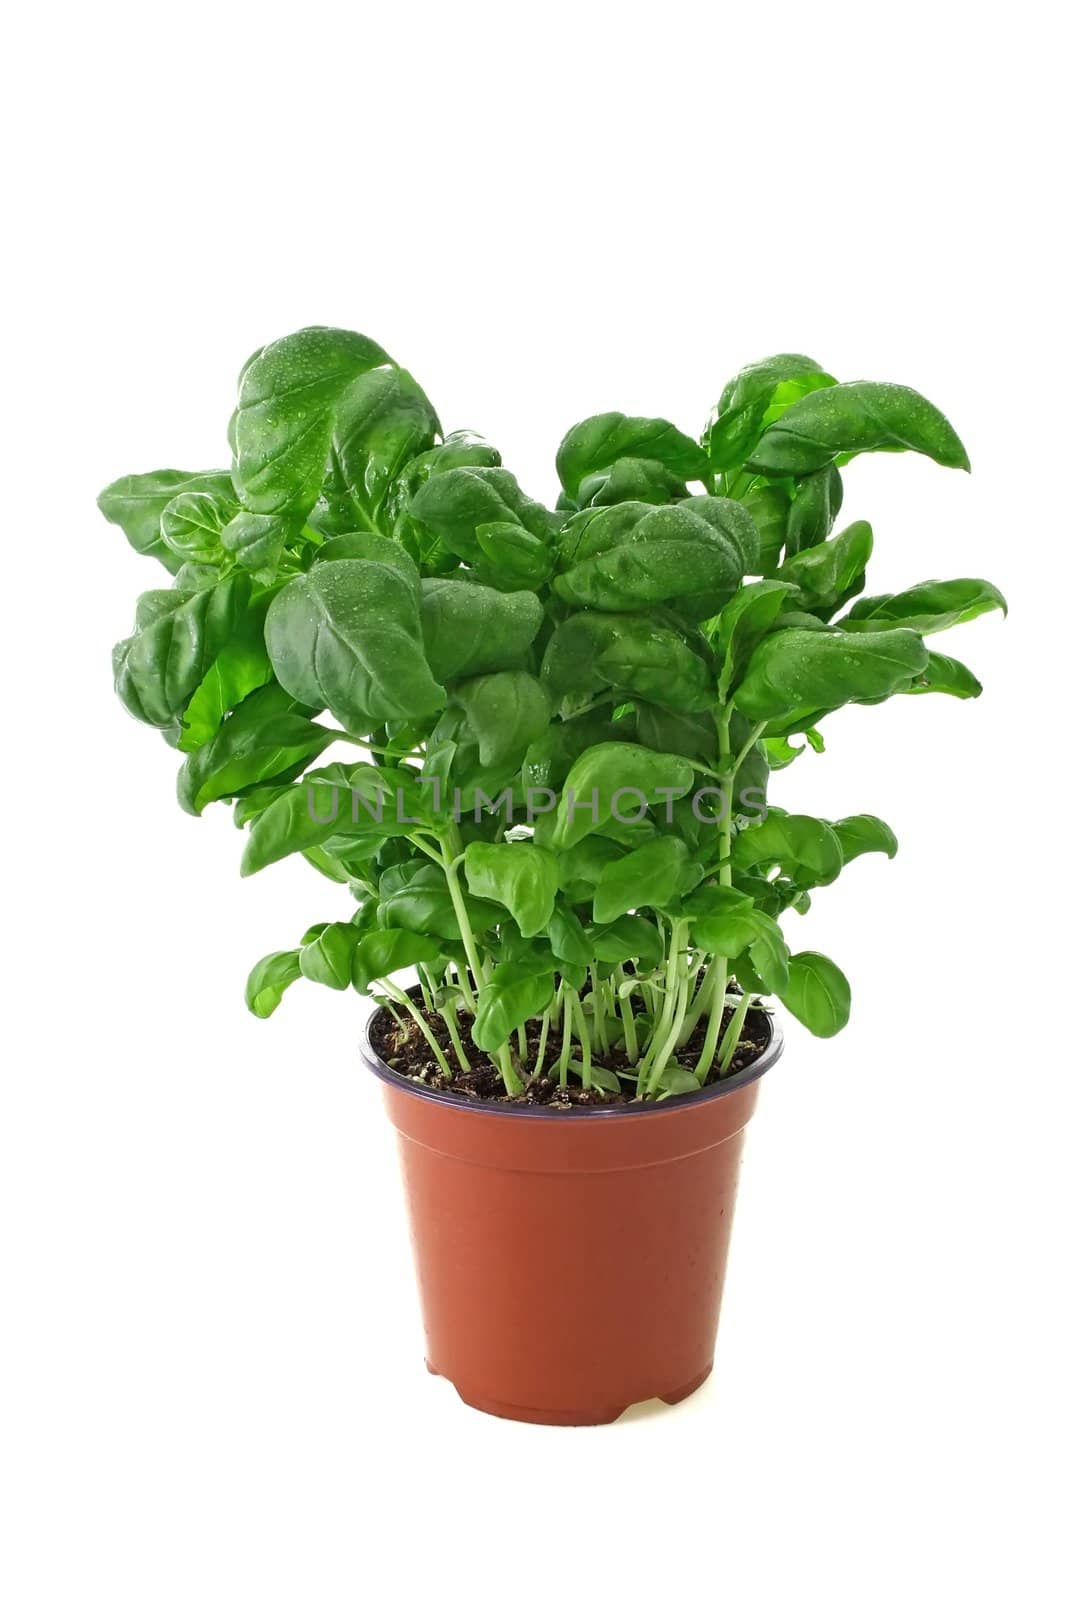 Basil in a pot on bright backround